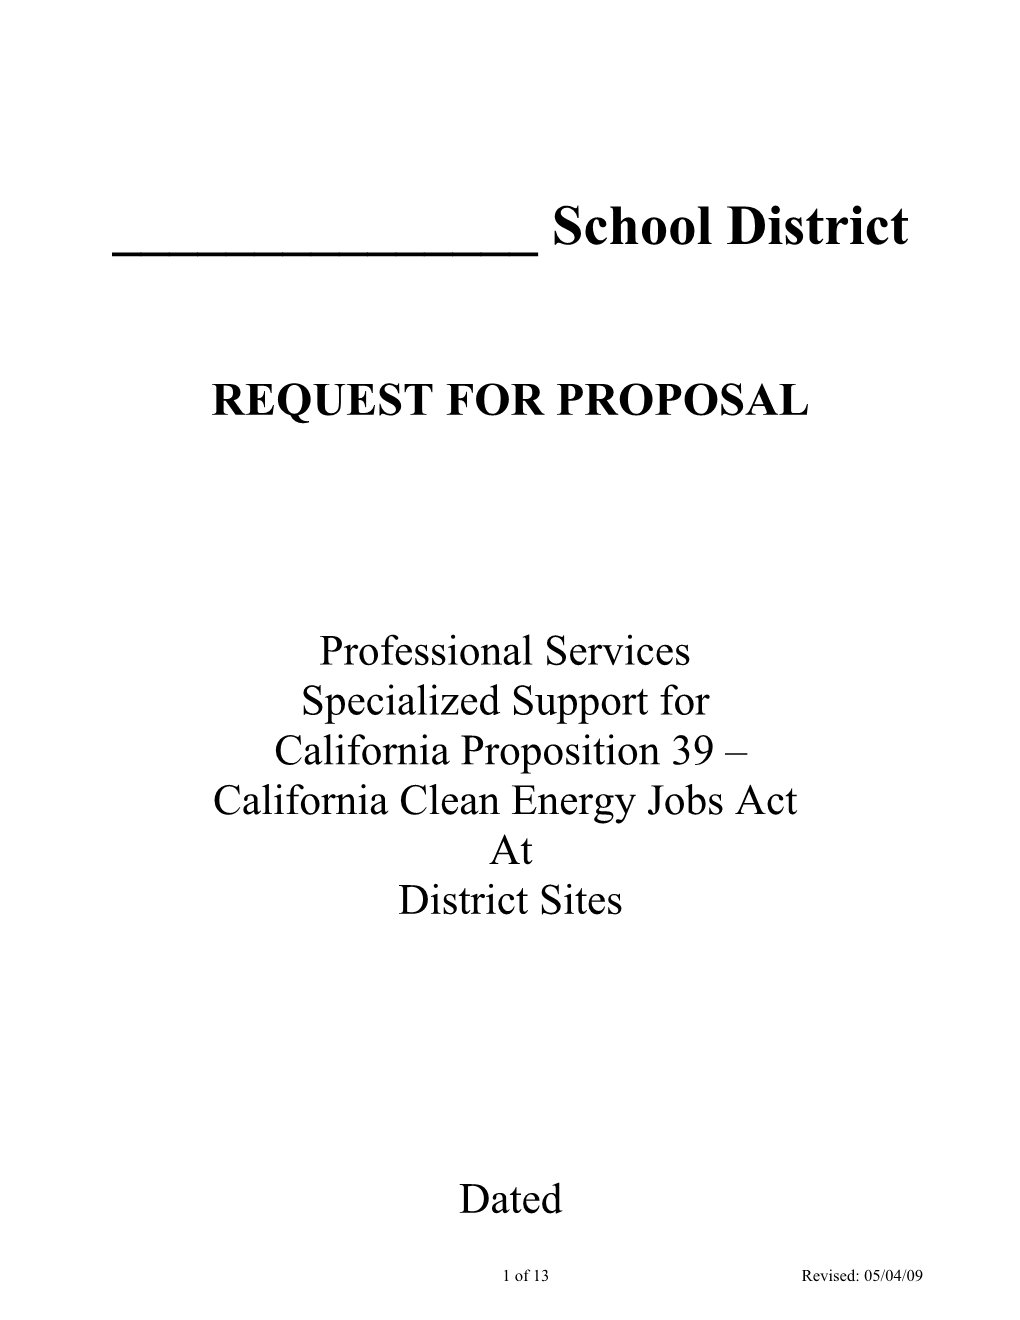 Request for Proposal s50